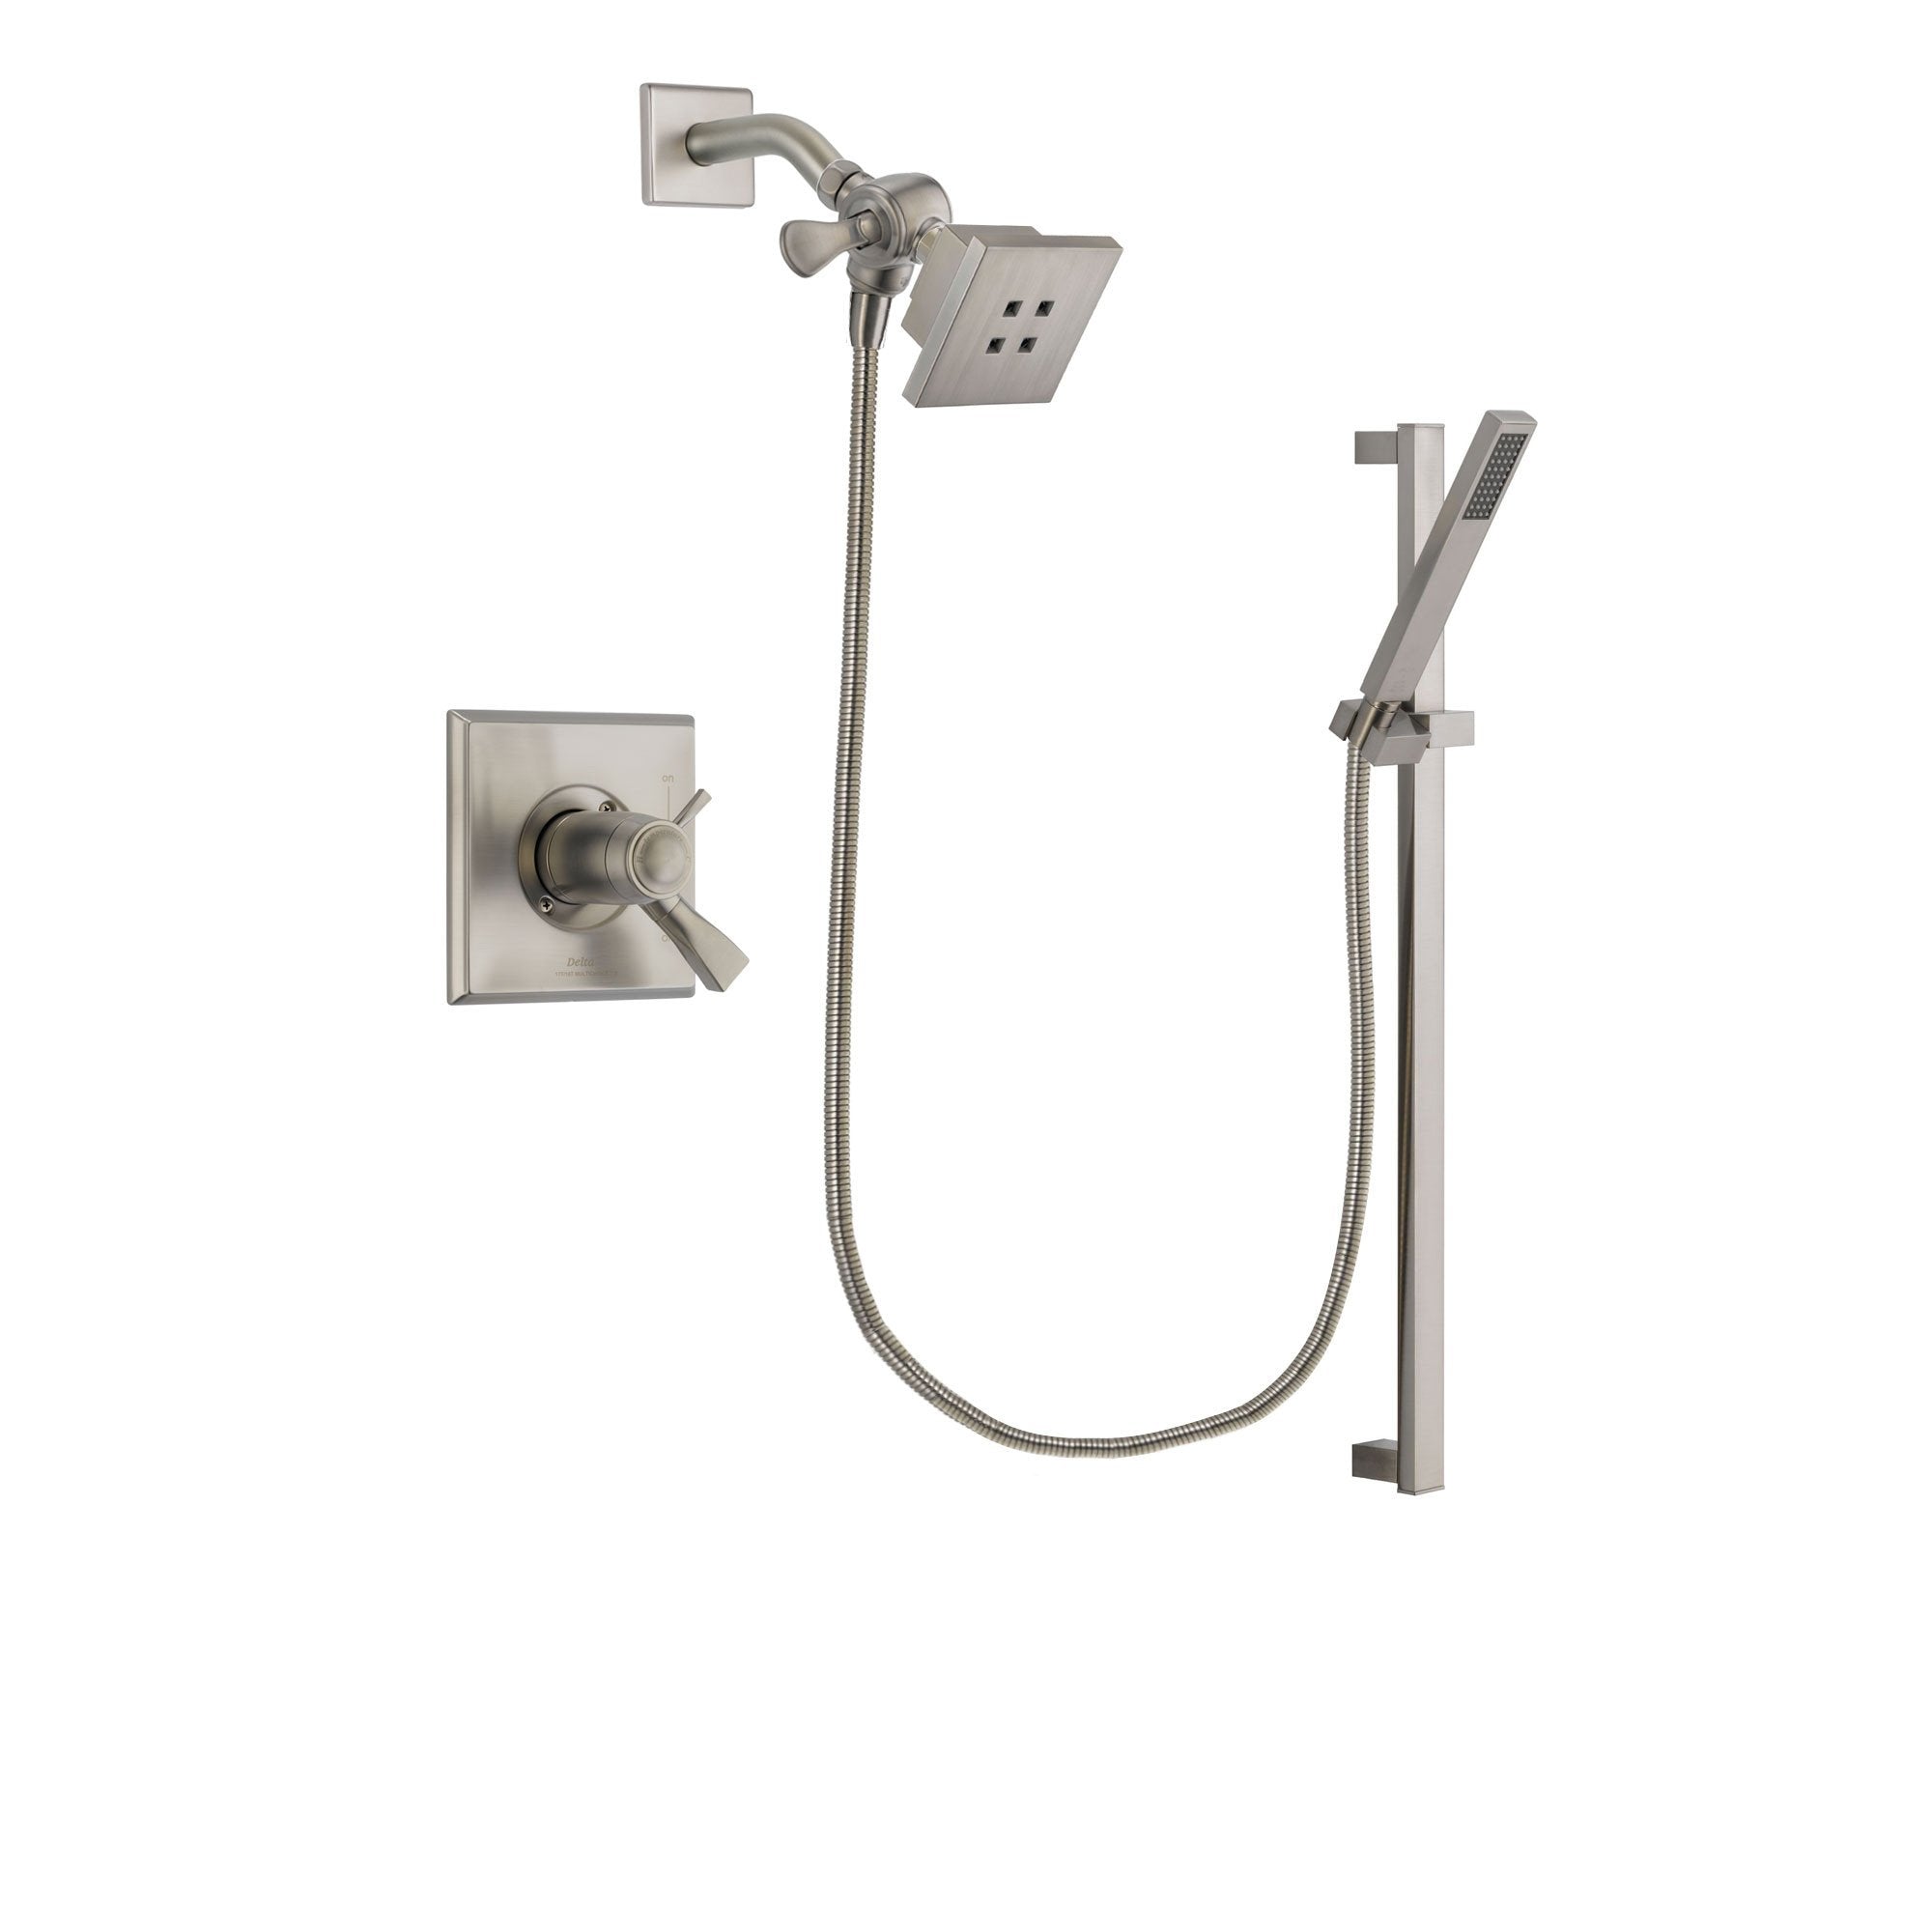 Delta Dryden Stainless Steel Finish Thermostatic Shower Faucet System Package with Square Showerhead and Modern Personal Hand Shower with Slide Bar Includes Rough-in Valve DSP2328V